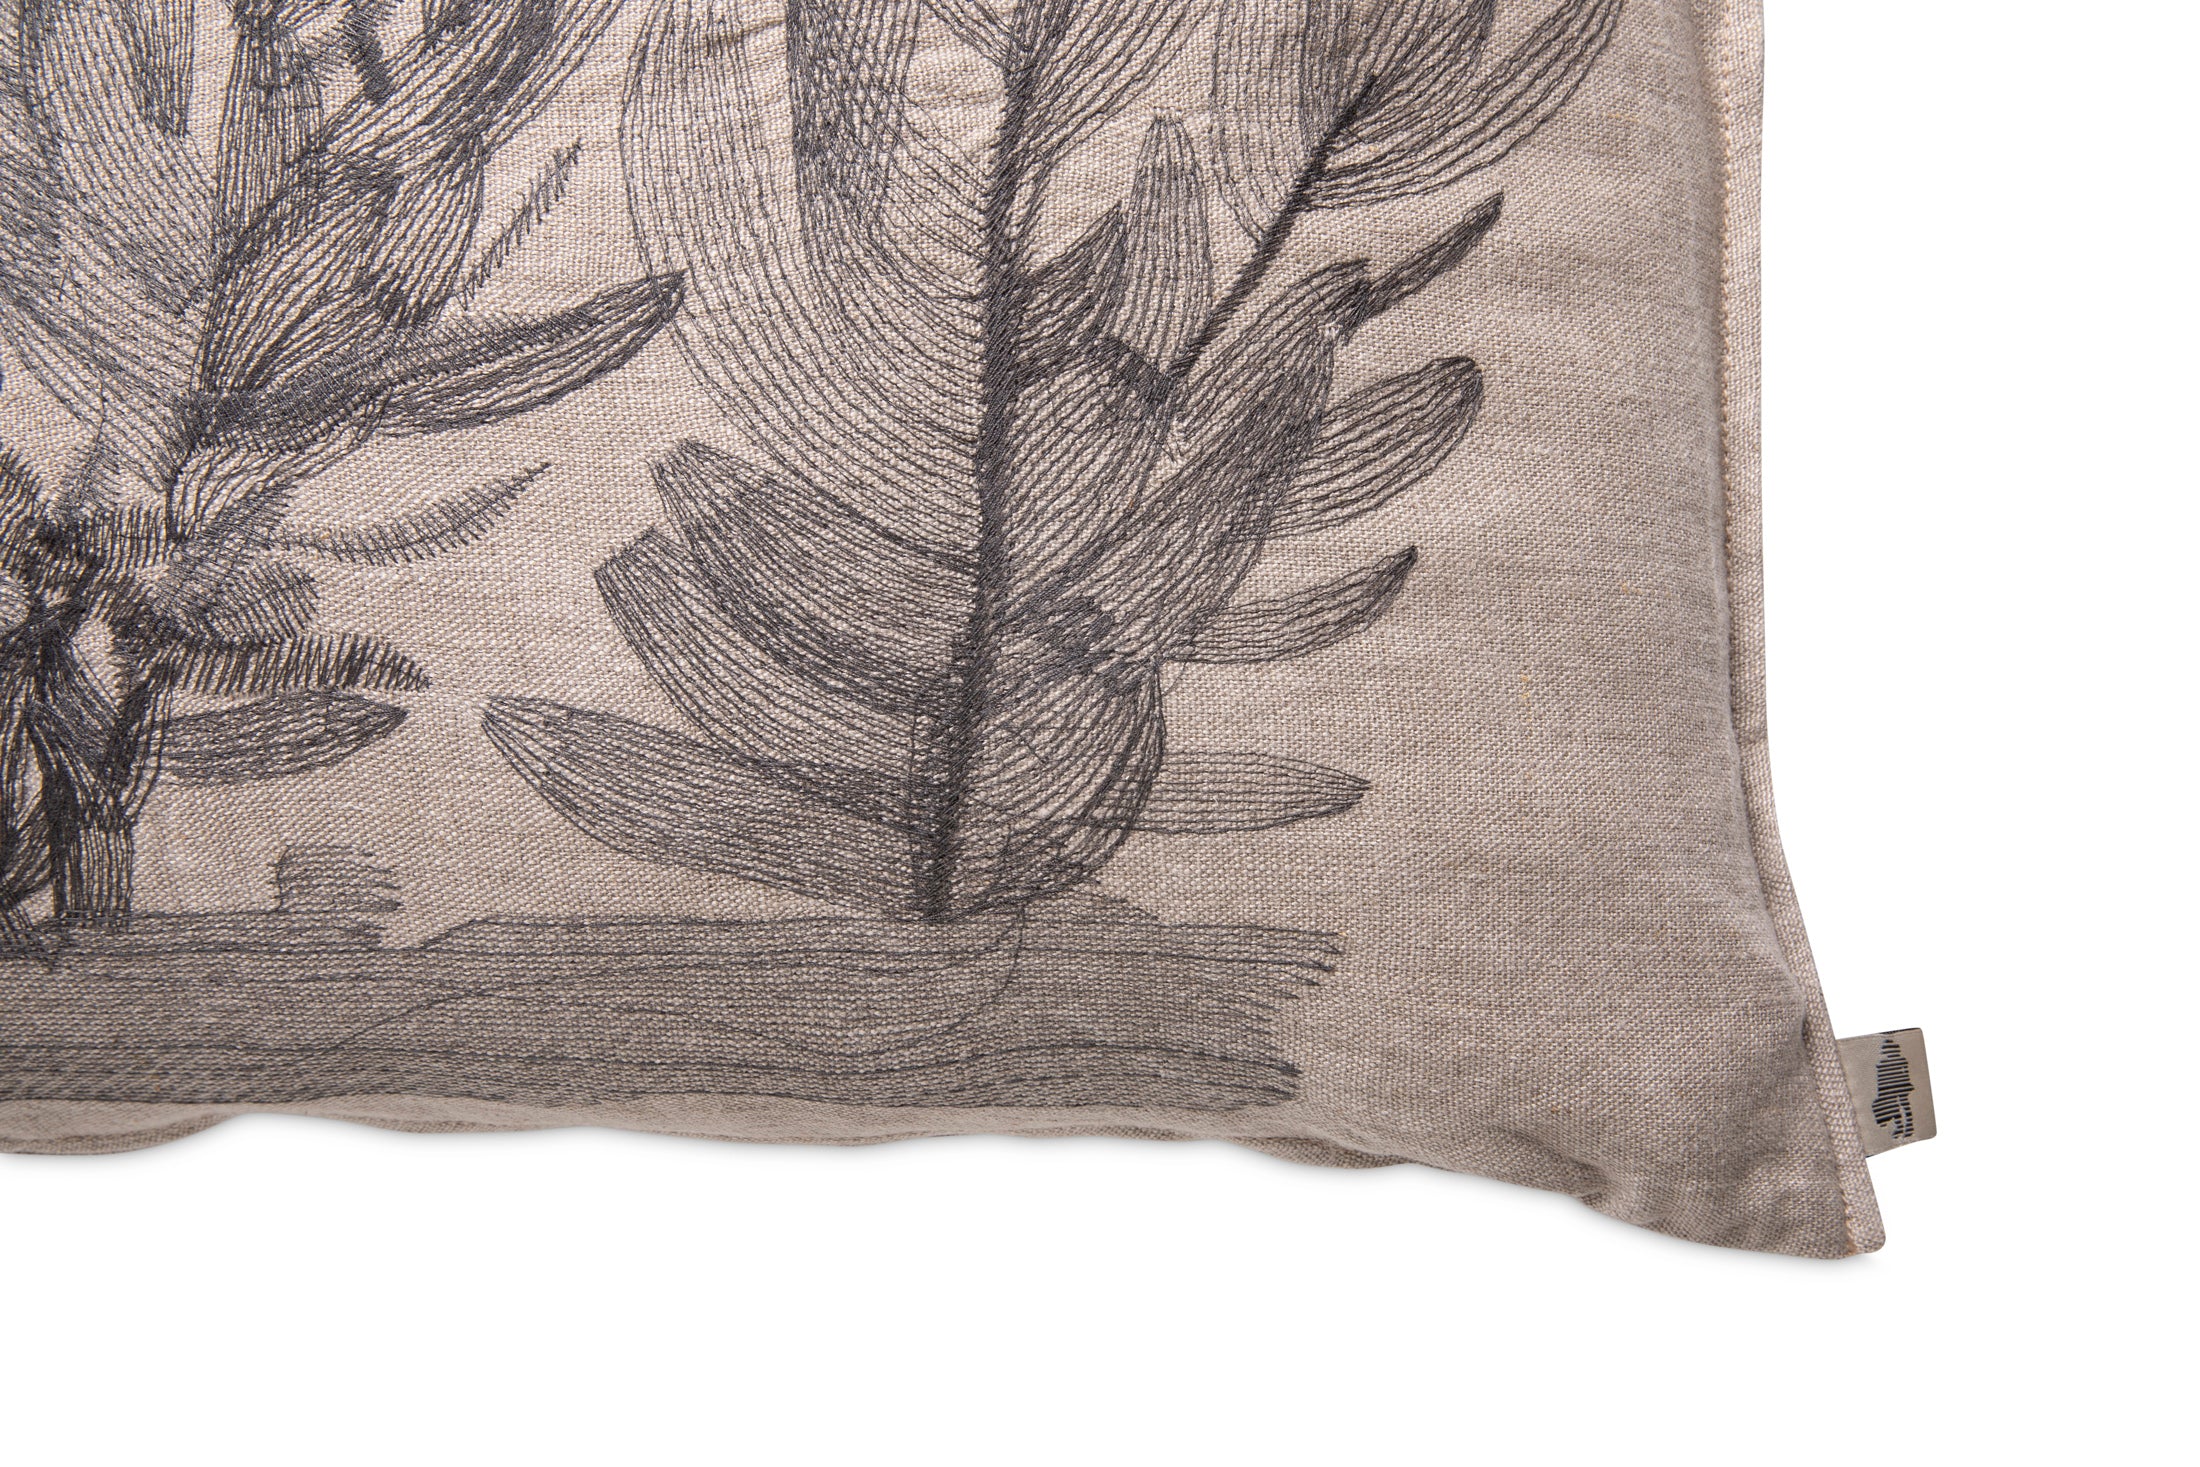 Protea Bos Embroidered Pillow